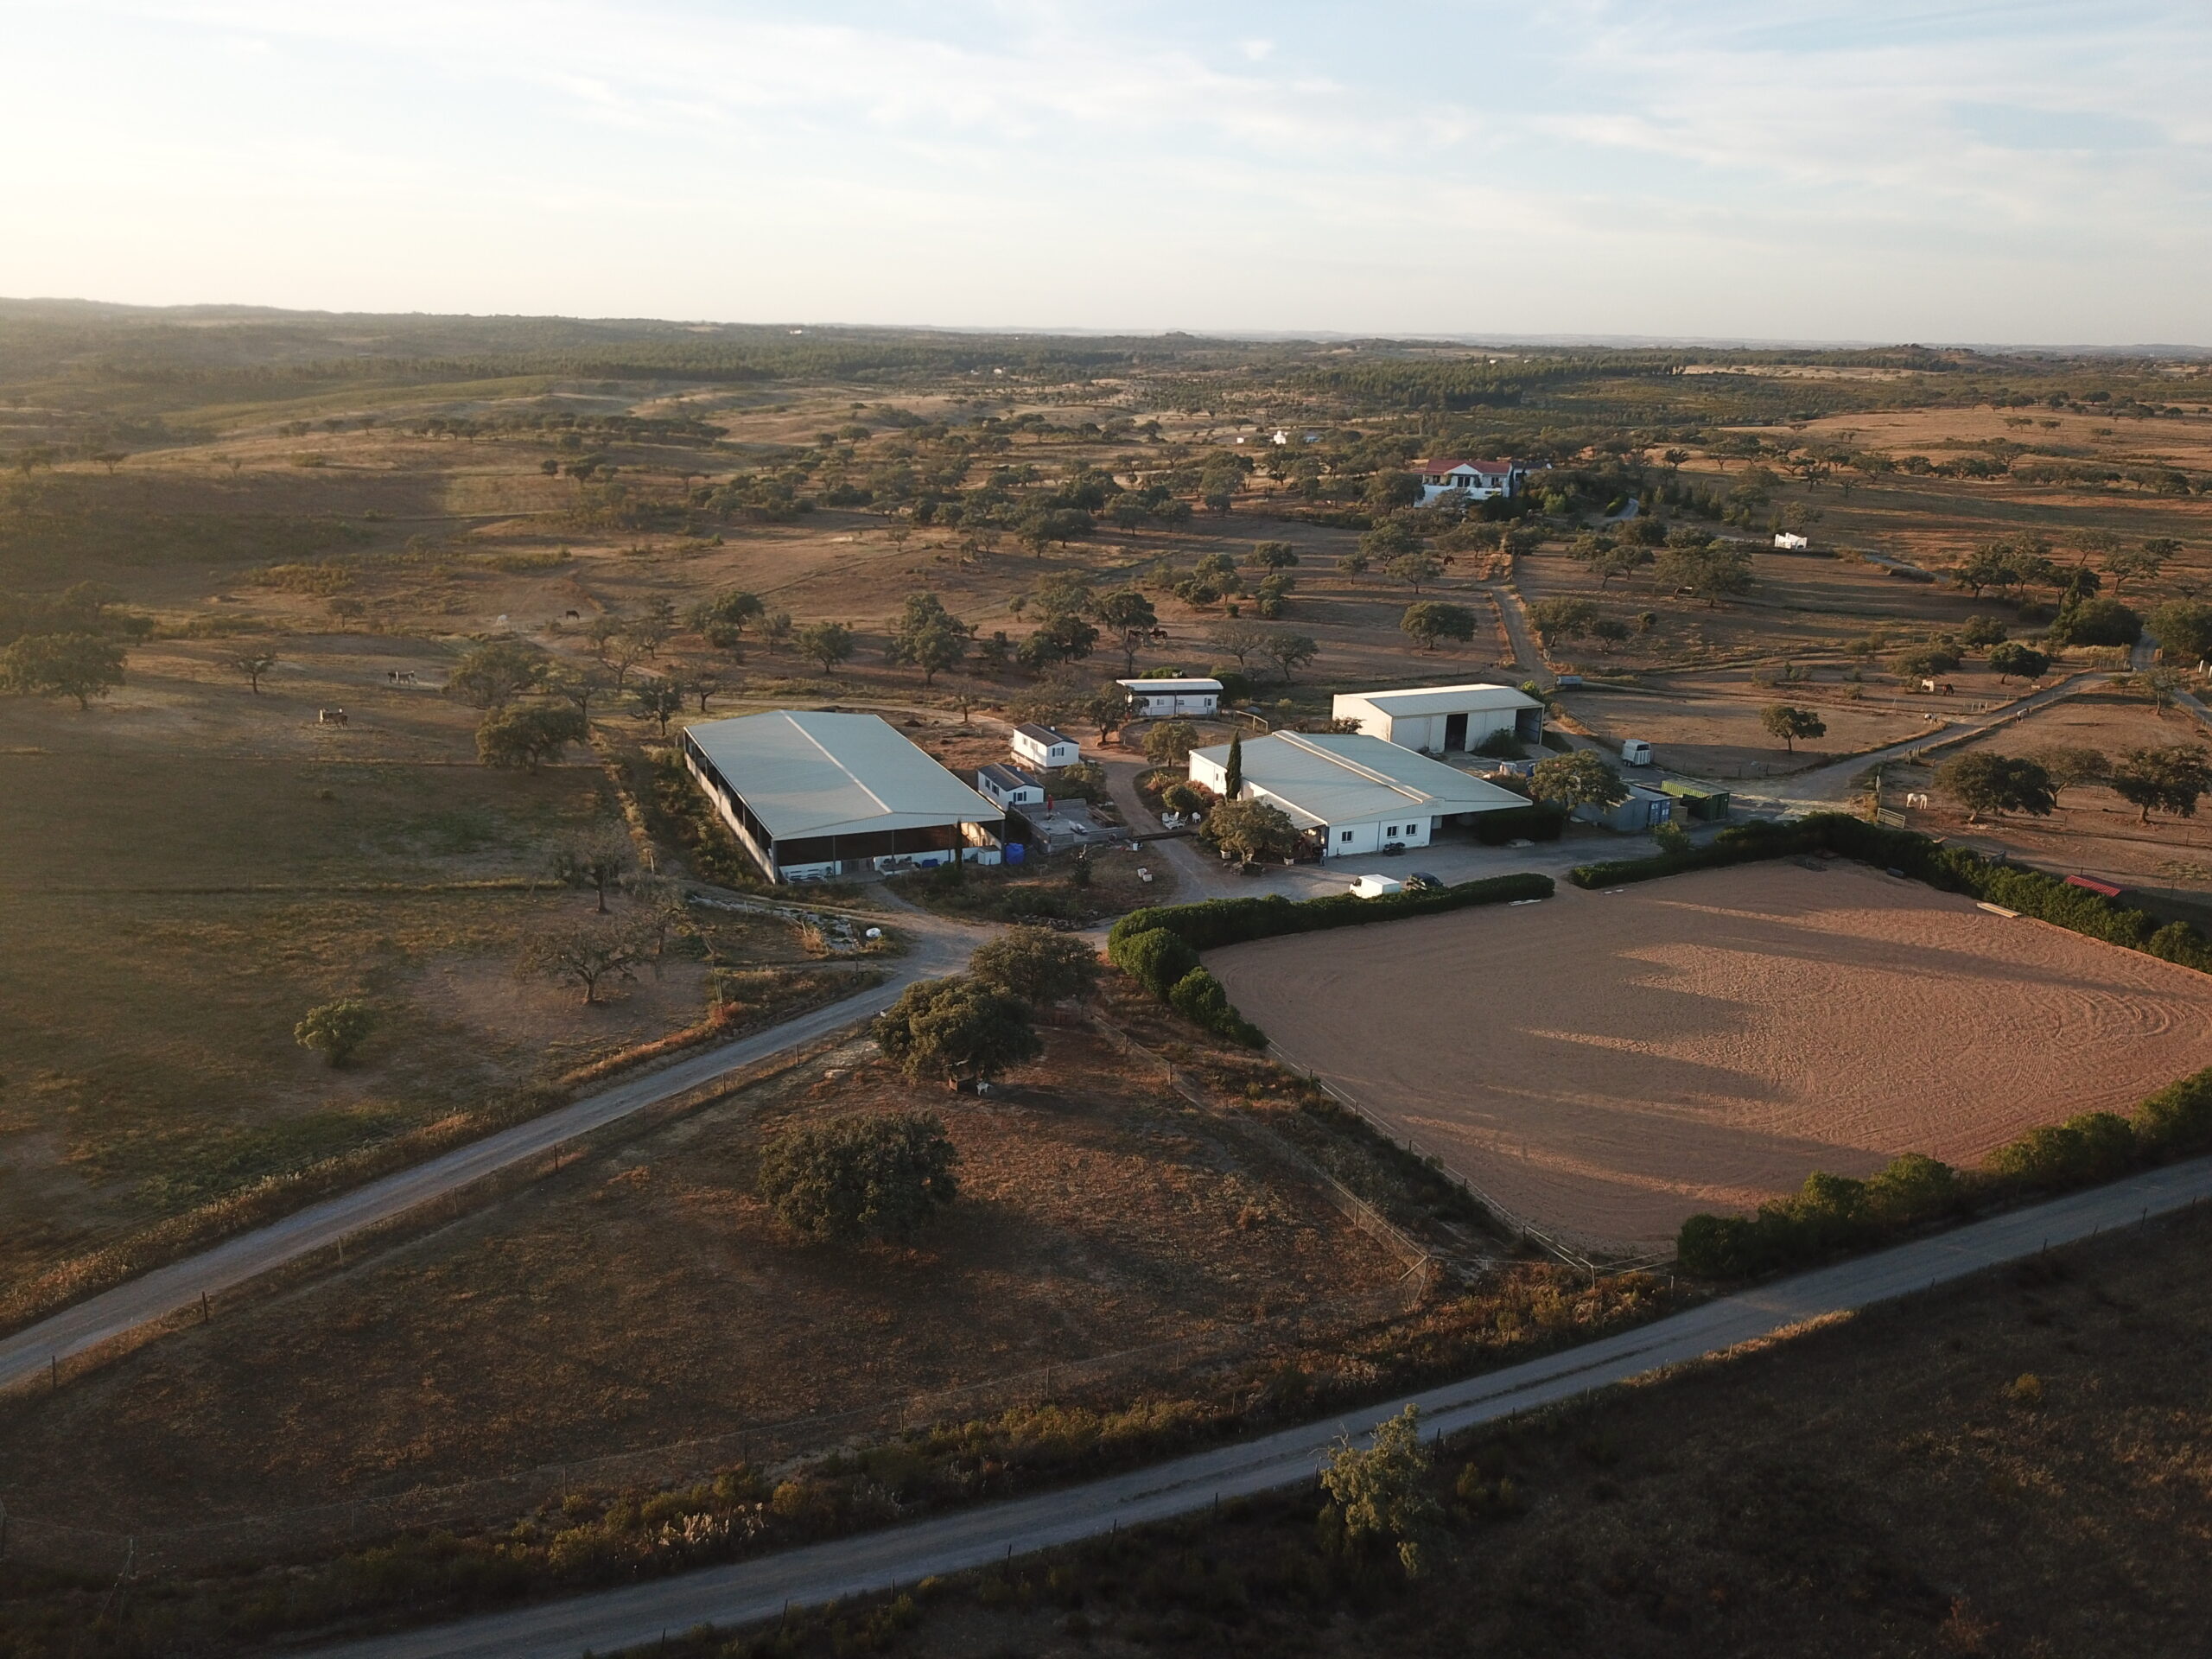 Aerial view of Equus Ourique Riding Centre from the side